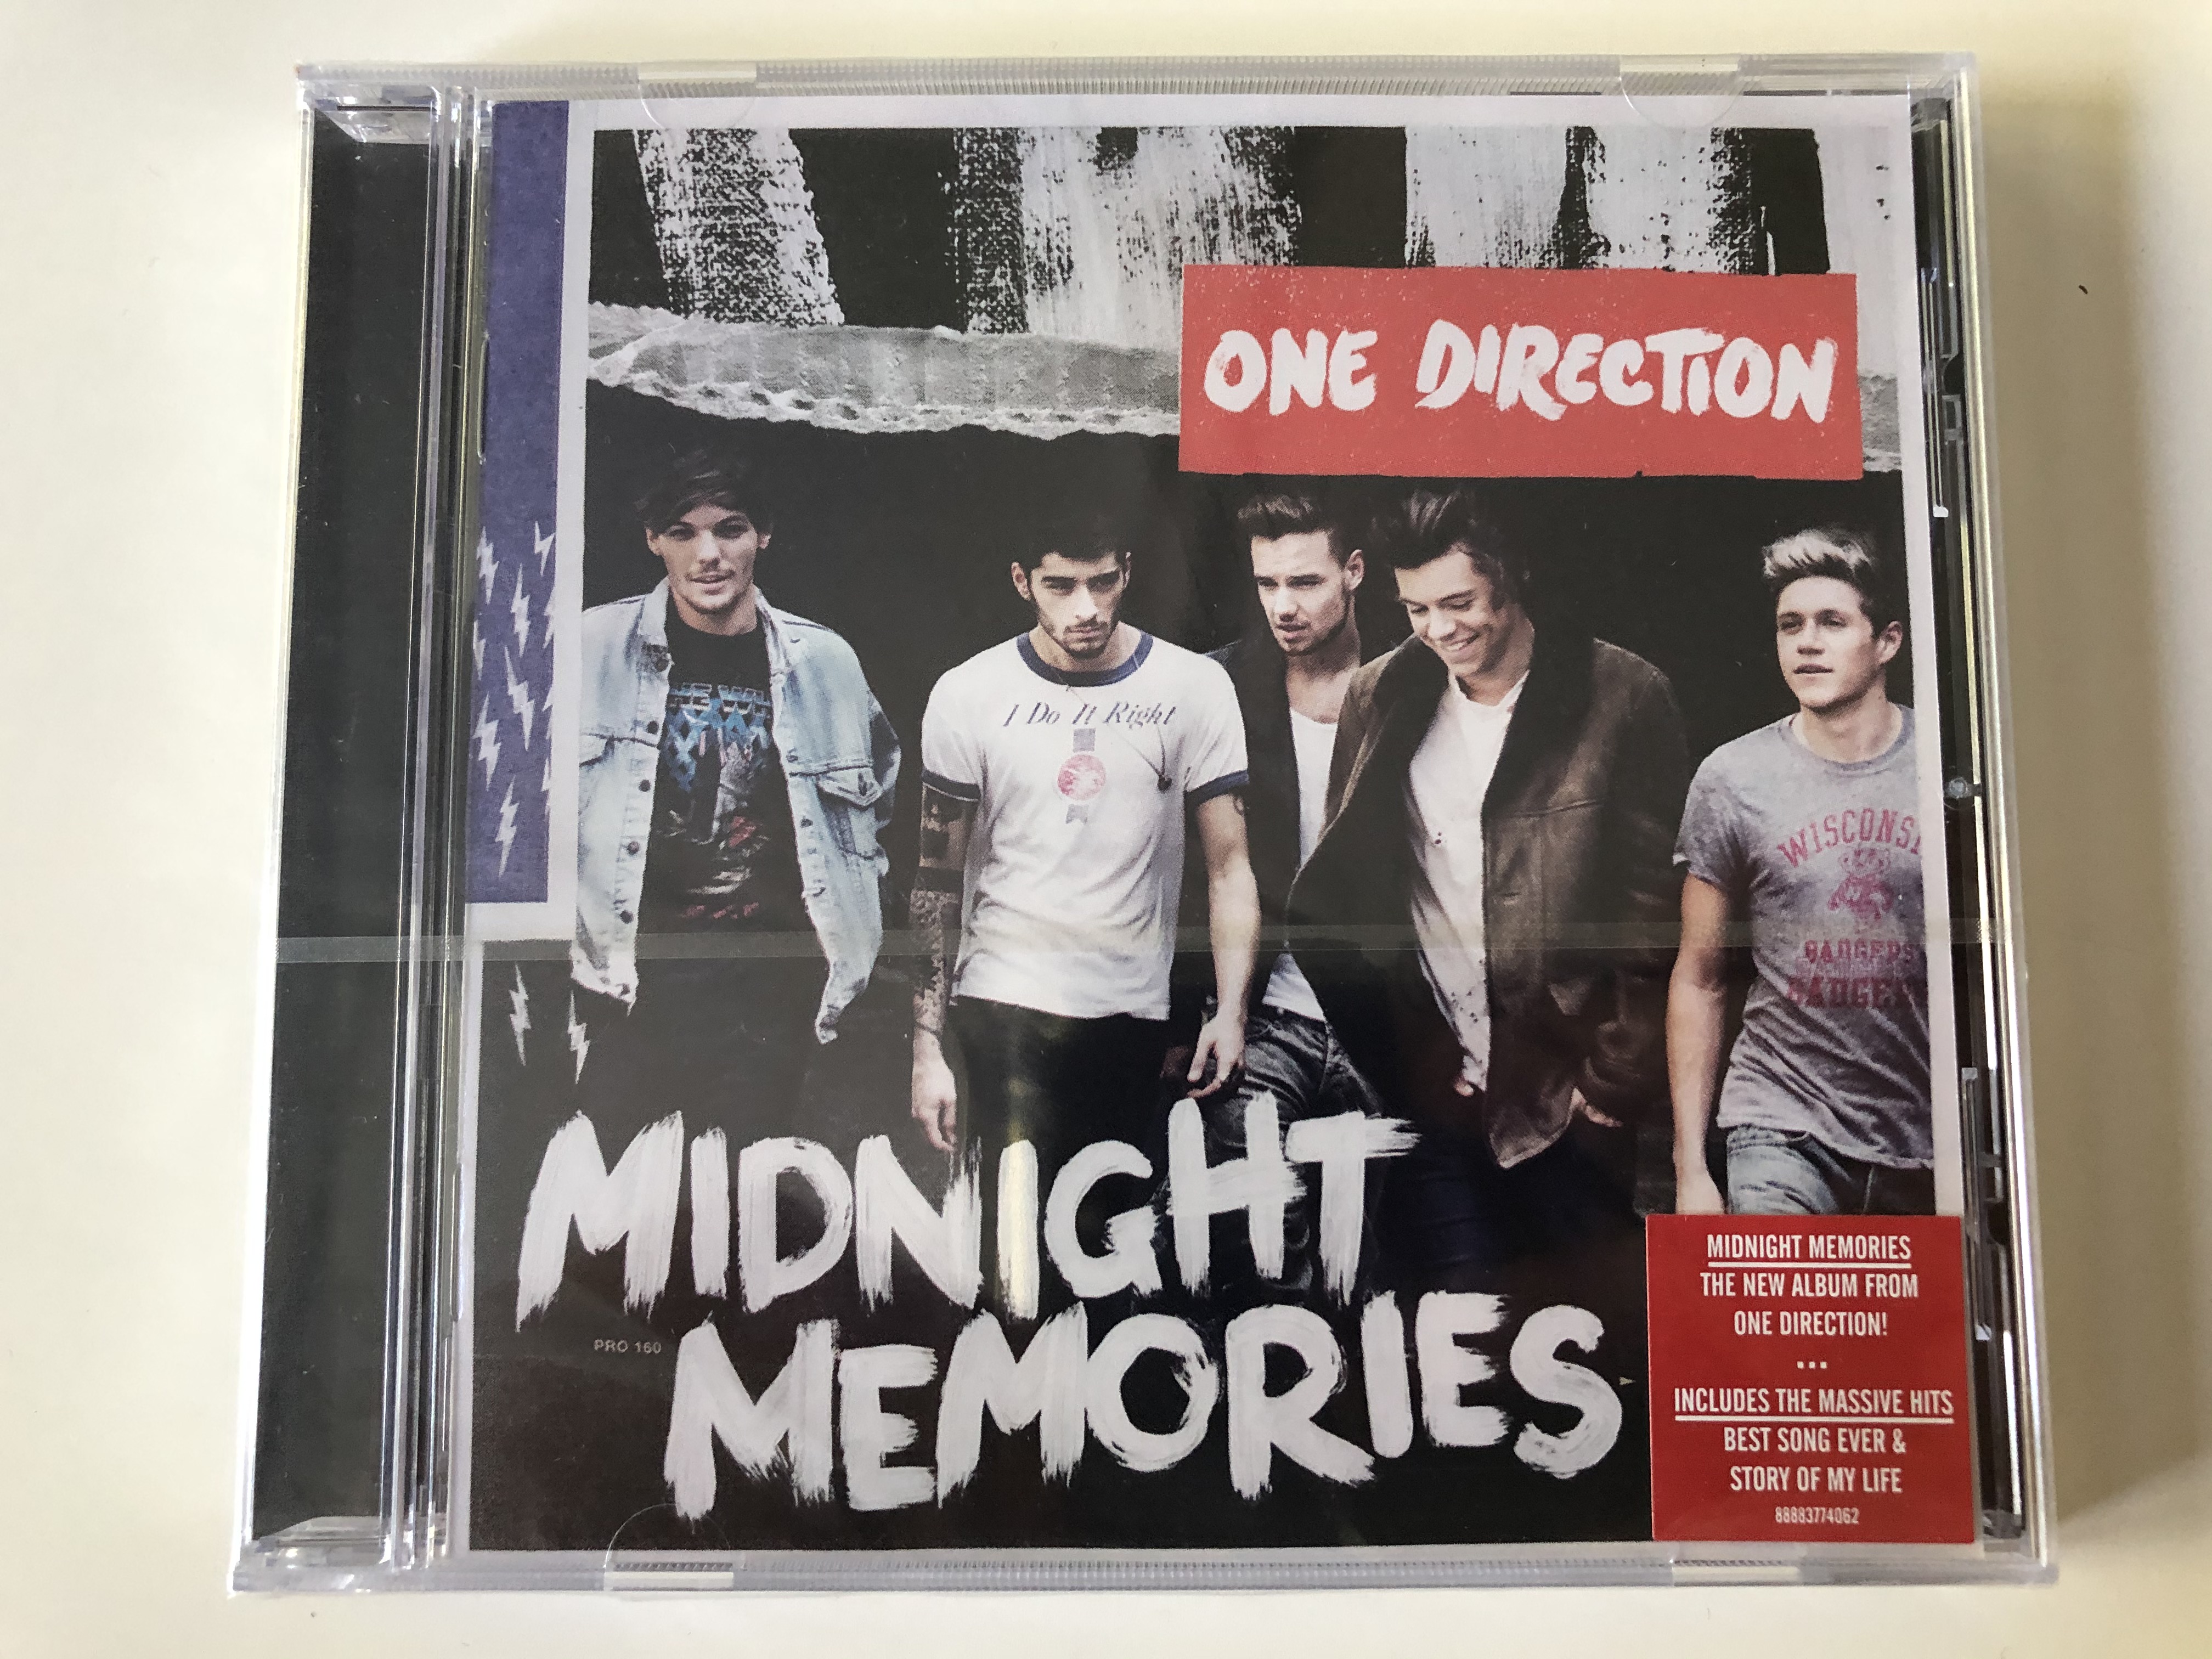 one-direction-midnight-memories-the-new-album-from-one-direction-includes-the-massive-hits-best-song-ever-story-of-my-life-sony-music-audio-cd-2013-88883774062-1-.jpg